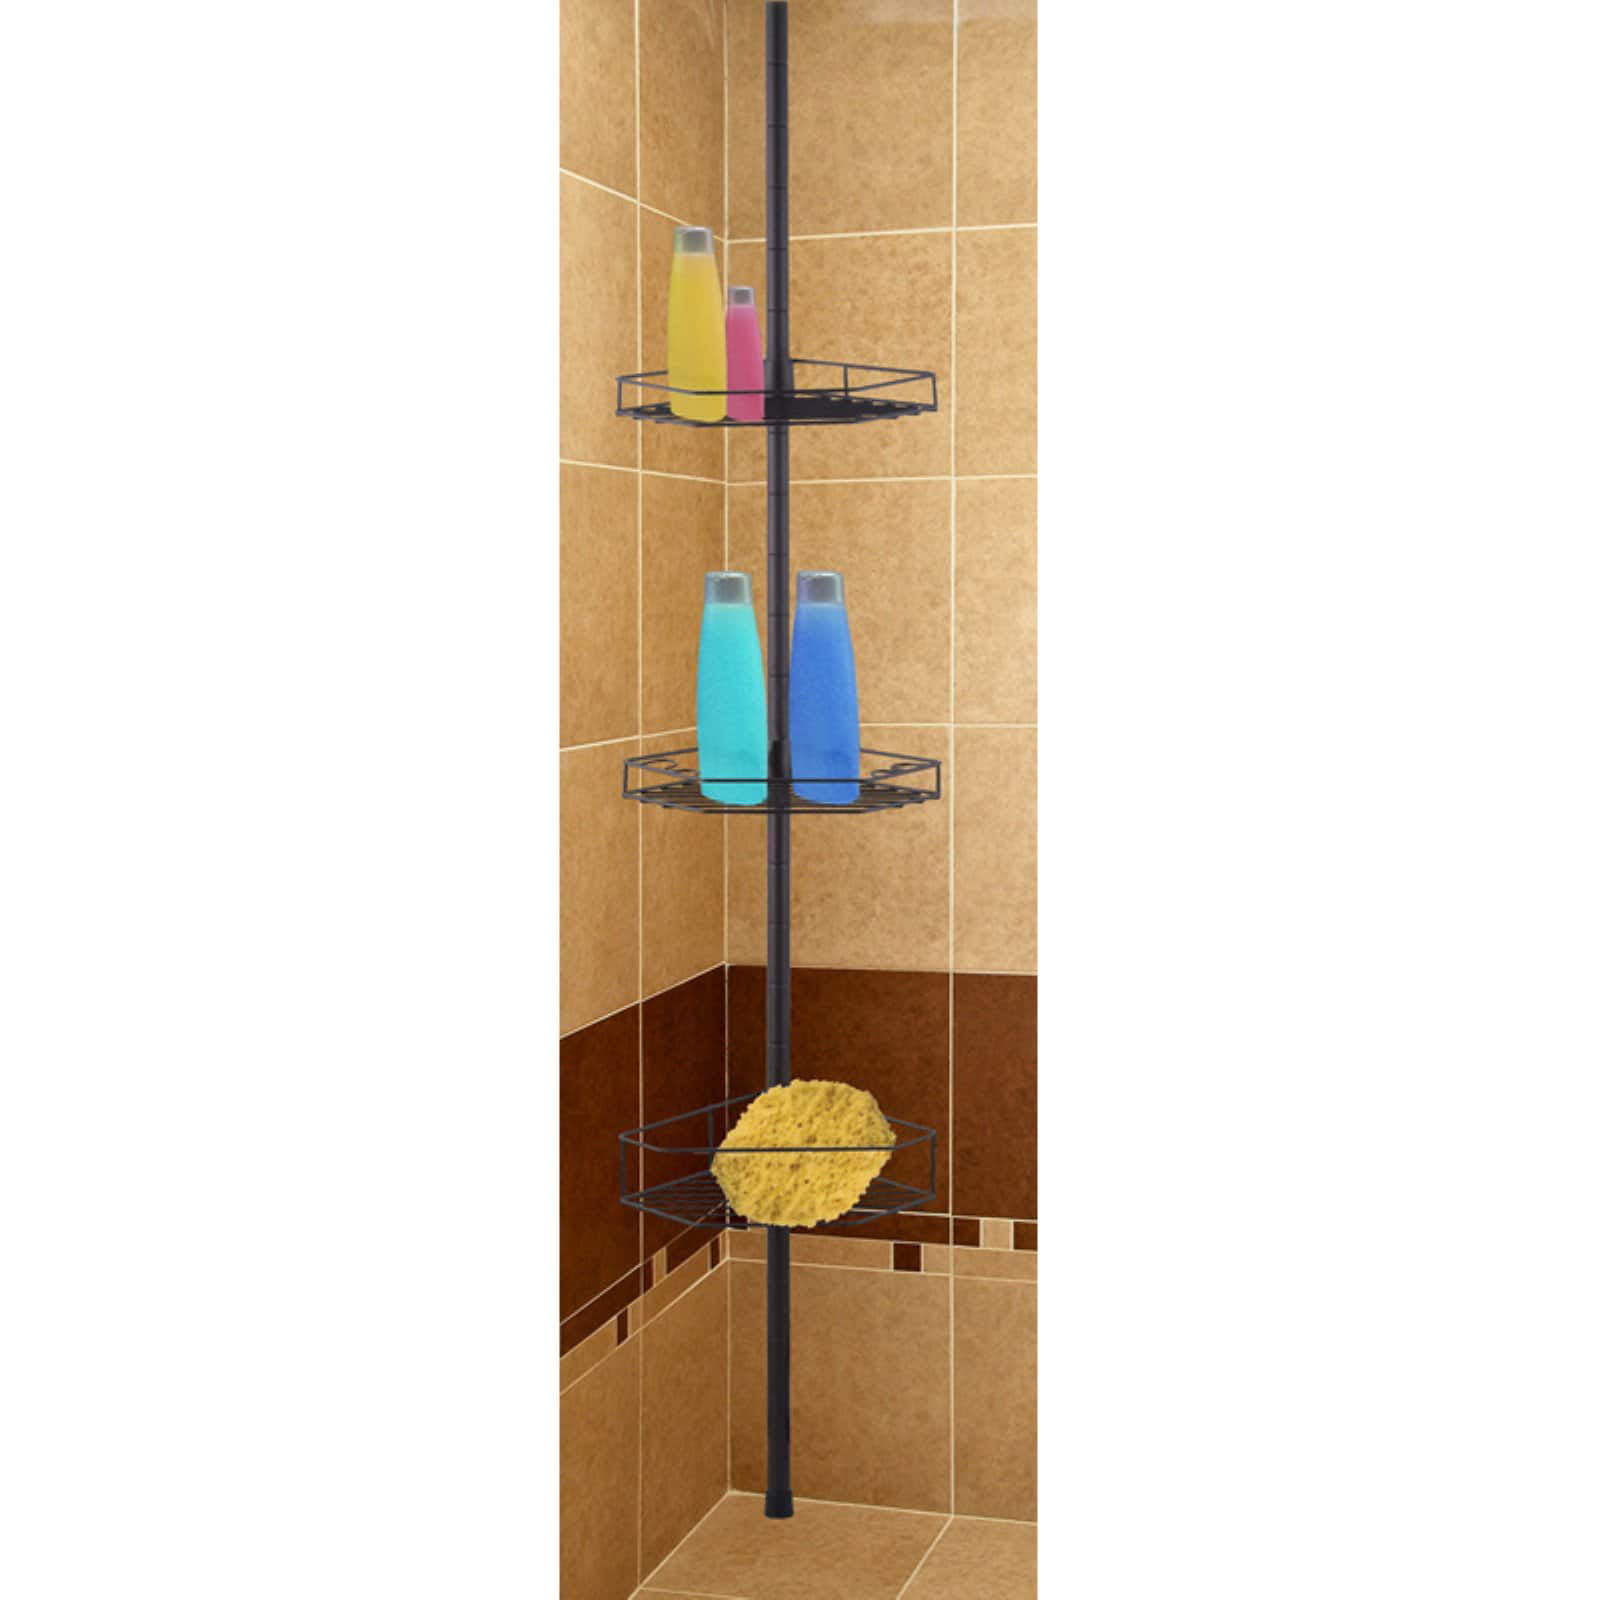 Details about   HomeZone 3 Tier Corner Shower Caddy with Adjustable Shelves Oil Rubbed Bronze 